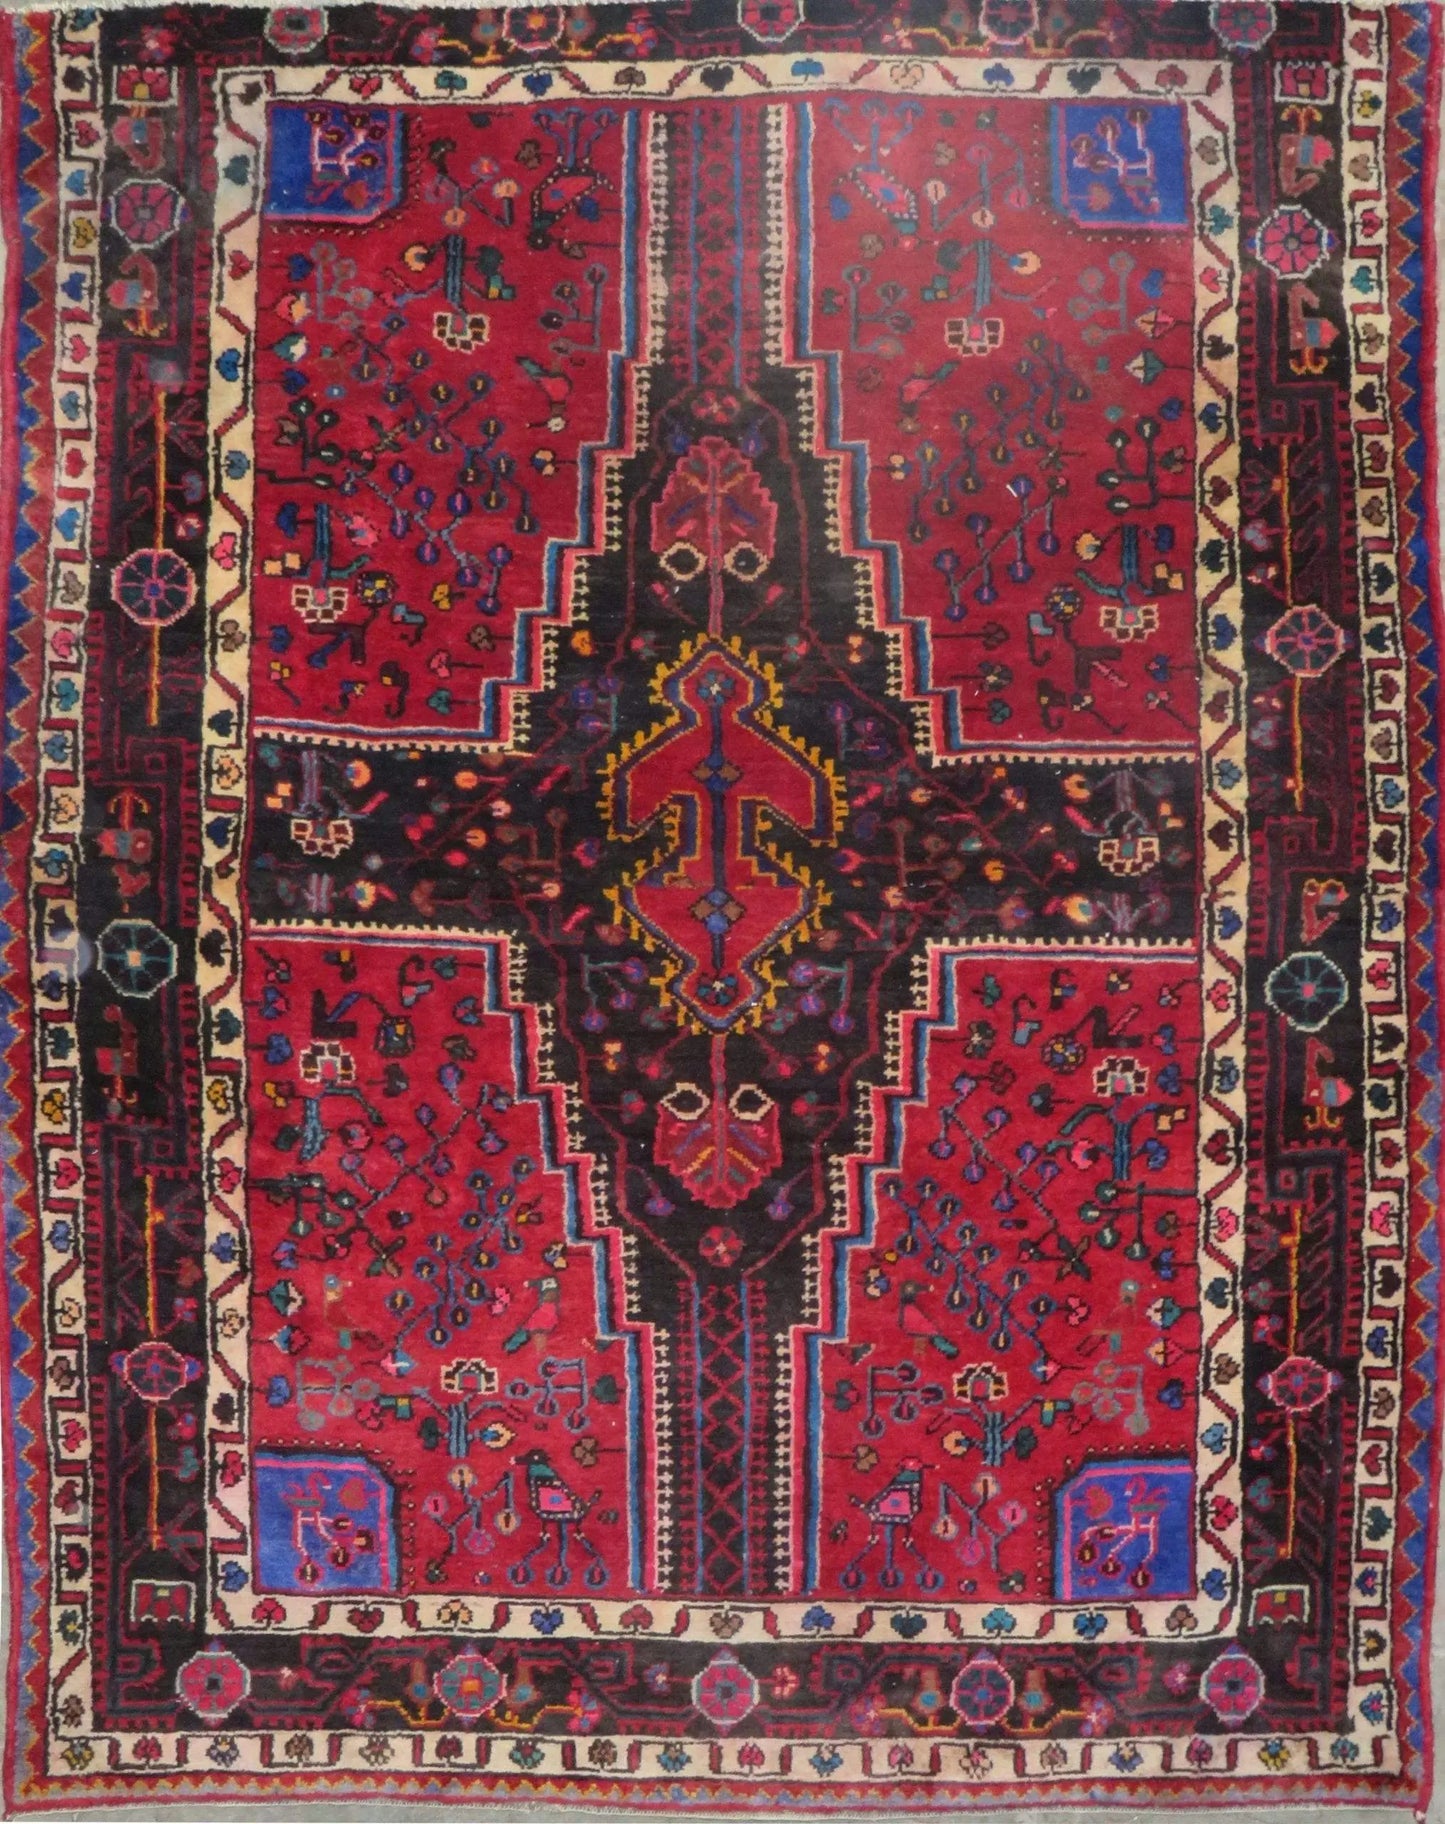 Hand-Knotted Persian Wool Rug _ Luxurious Vintage Design, 6'6" x 5'2", Artisan Crafted